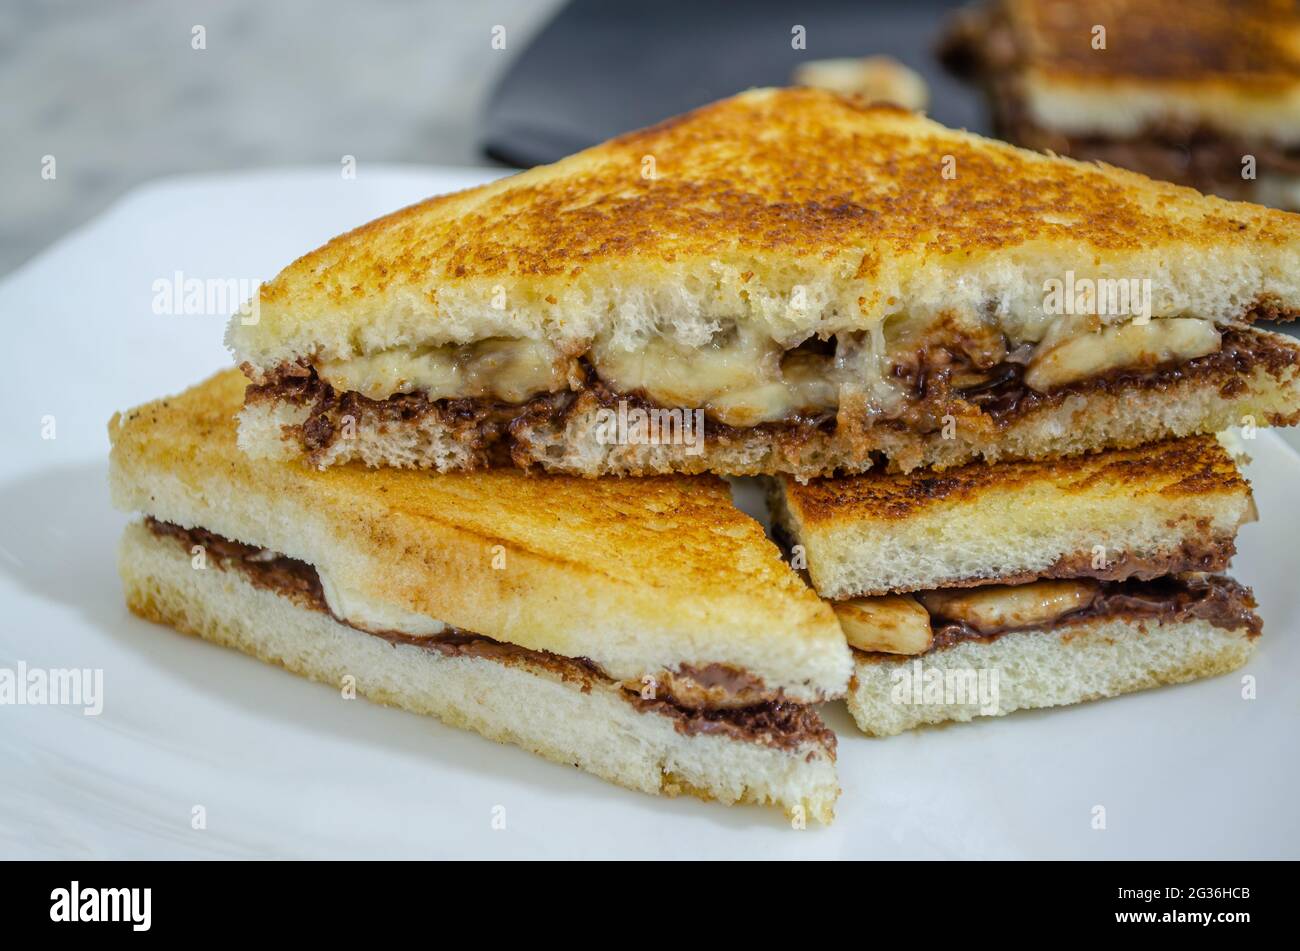 Ready-to-Eat, Yummy, Chocolate Banana Sandwich pieces in a plate. Macro Shot Stock Photo